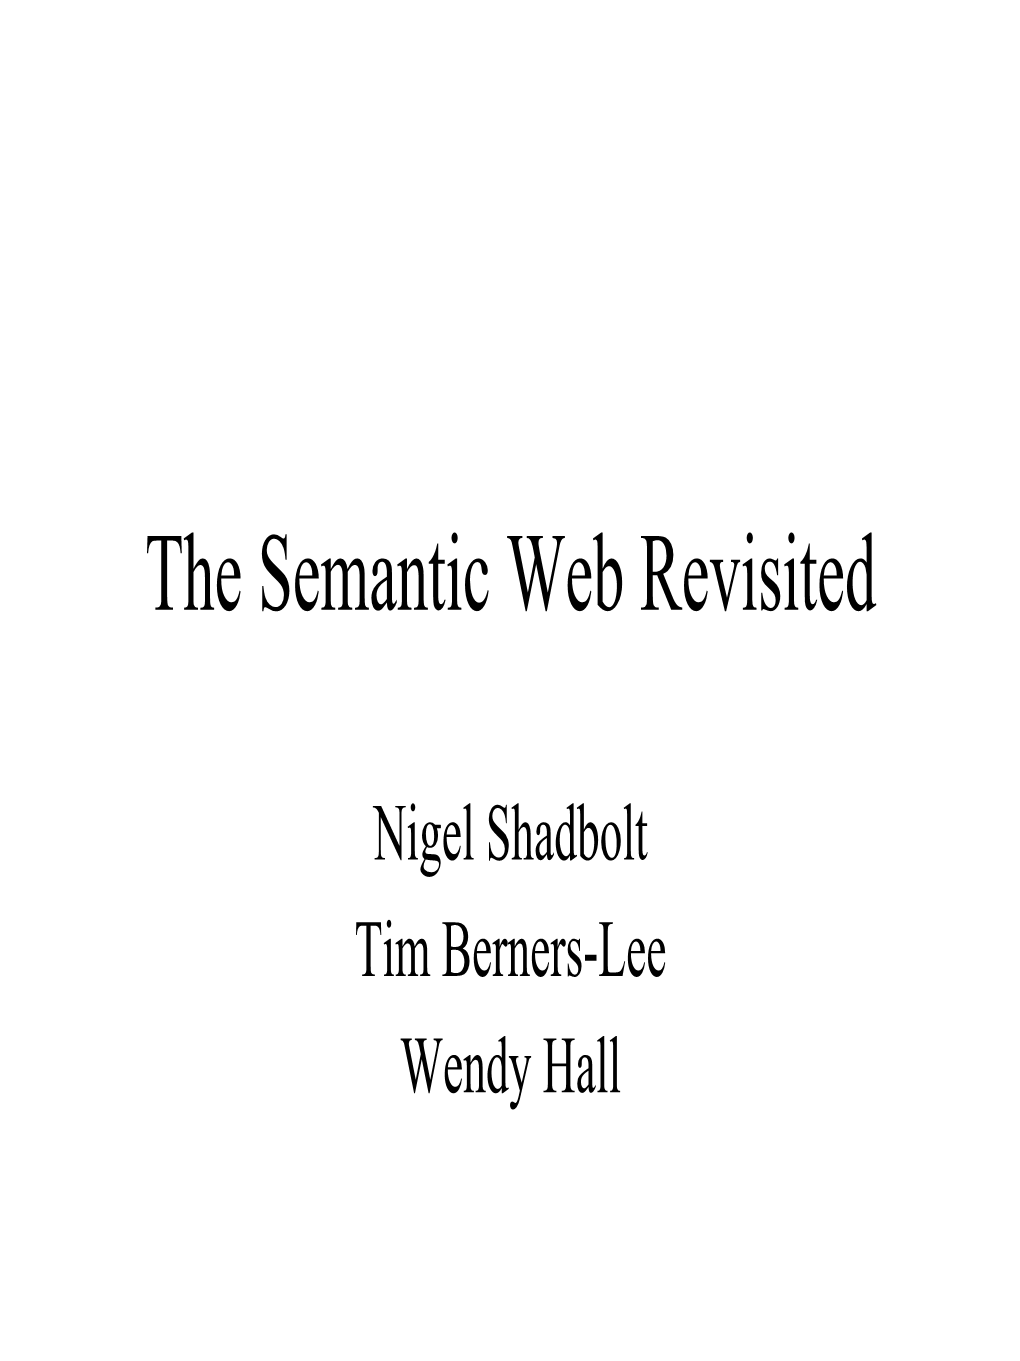 The Semantic Web Revisited